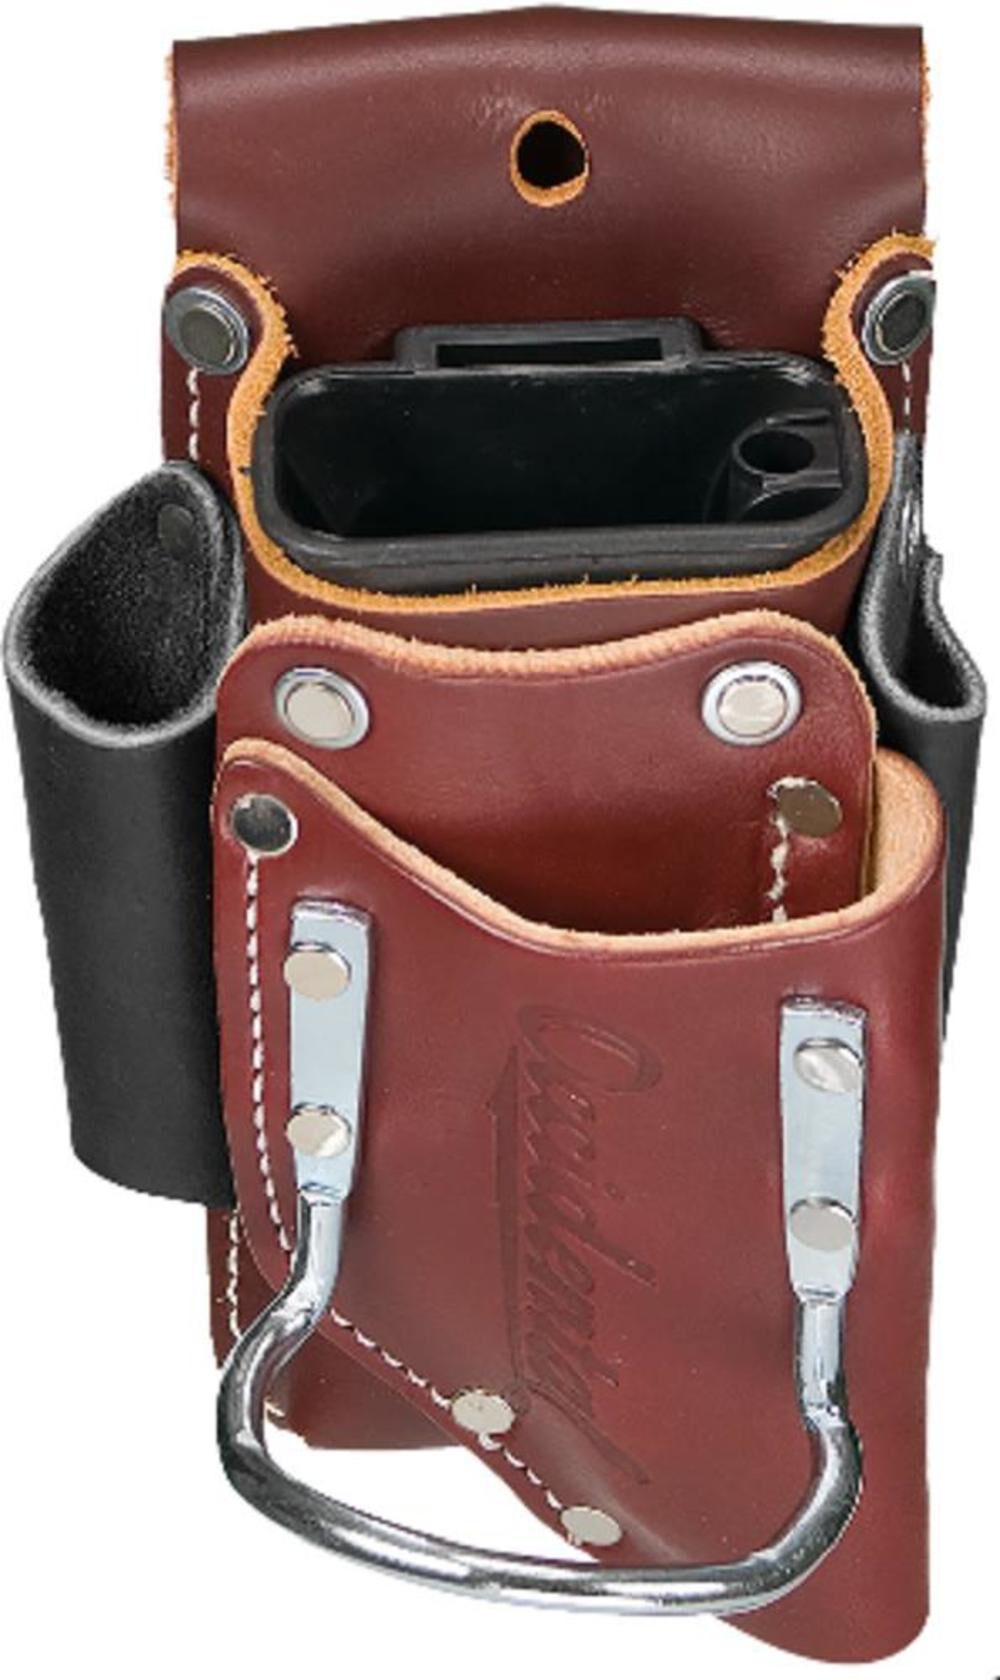 Leather Belt Worn - 5-in-1 Tool/Tape Holder 5520